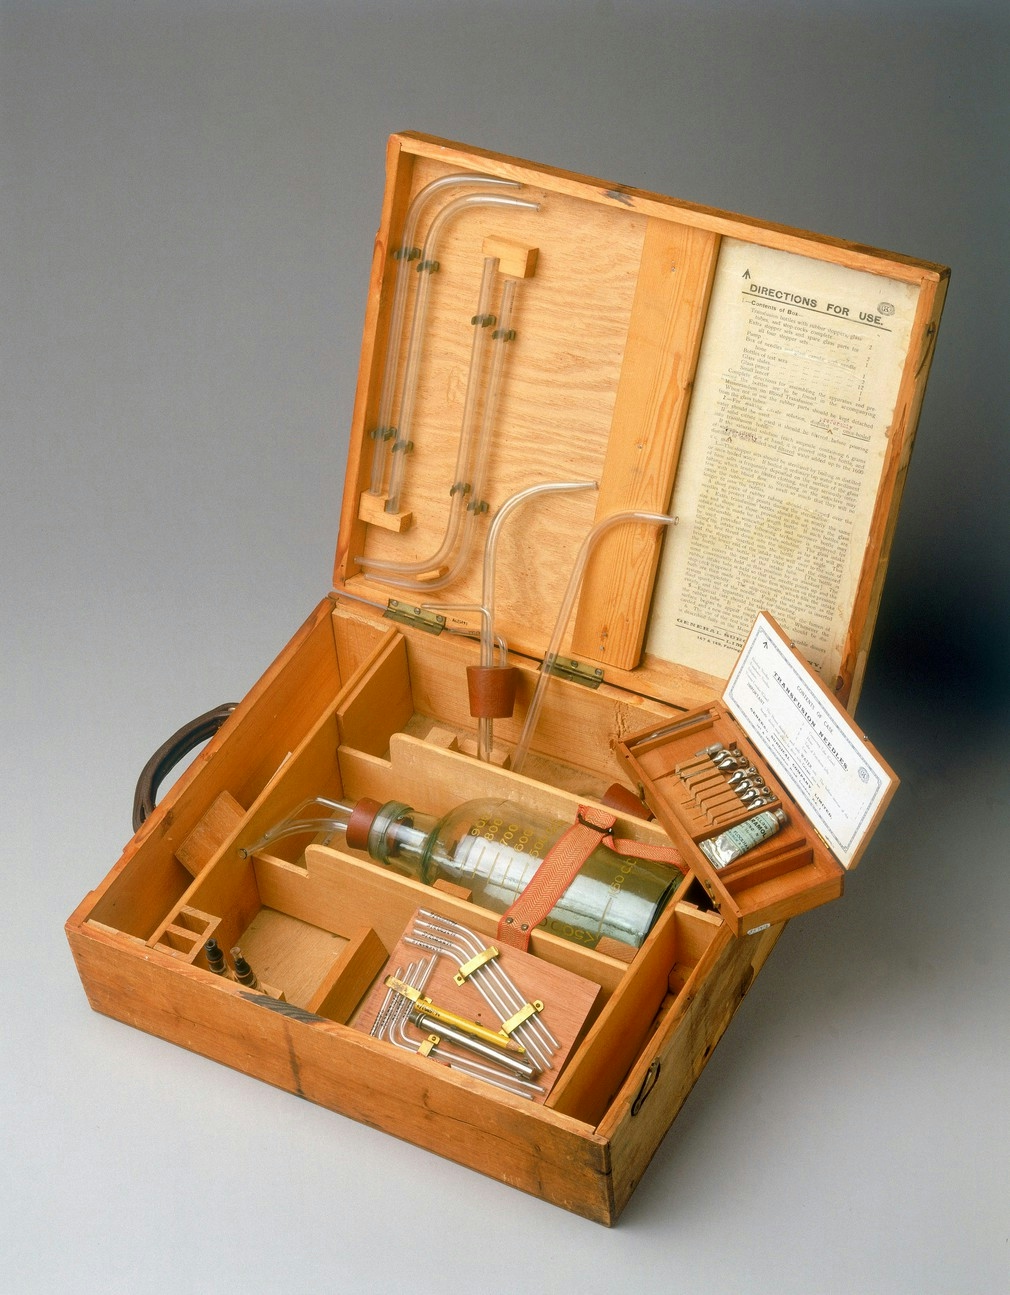 Image of an open wooden box with section dividers containing tubes and a bottle.